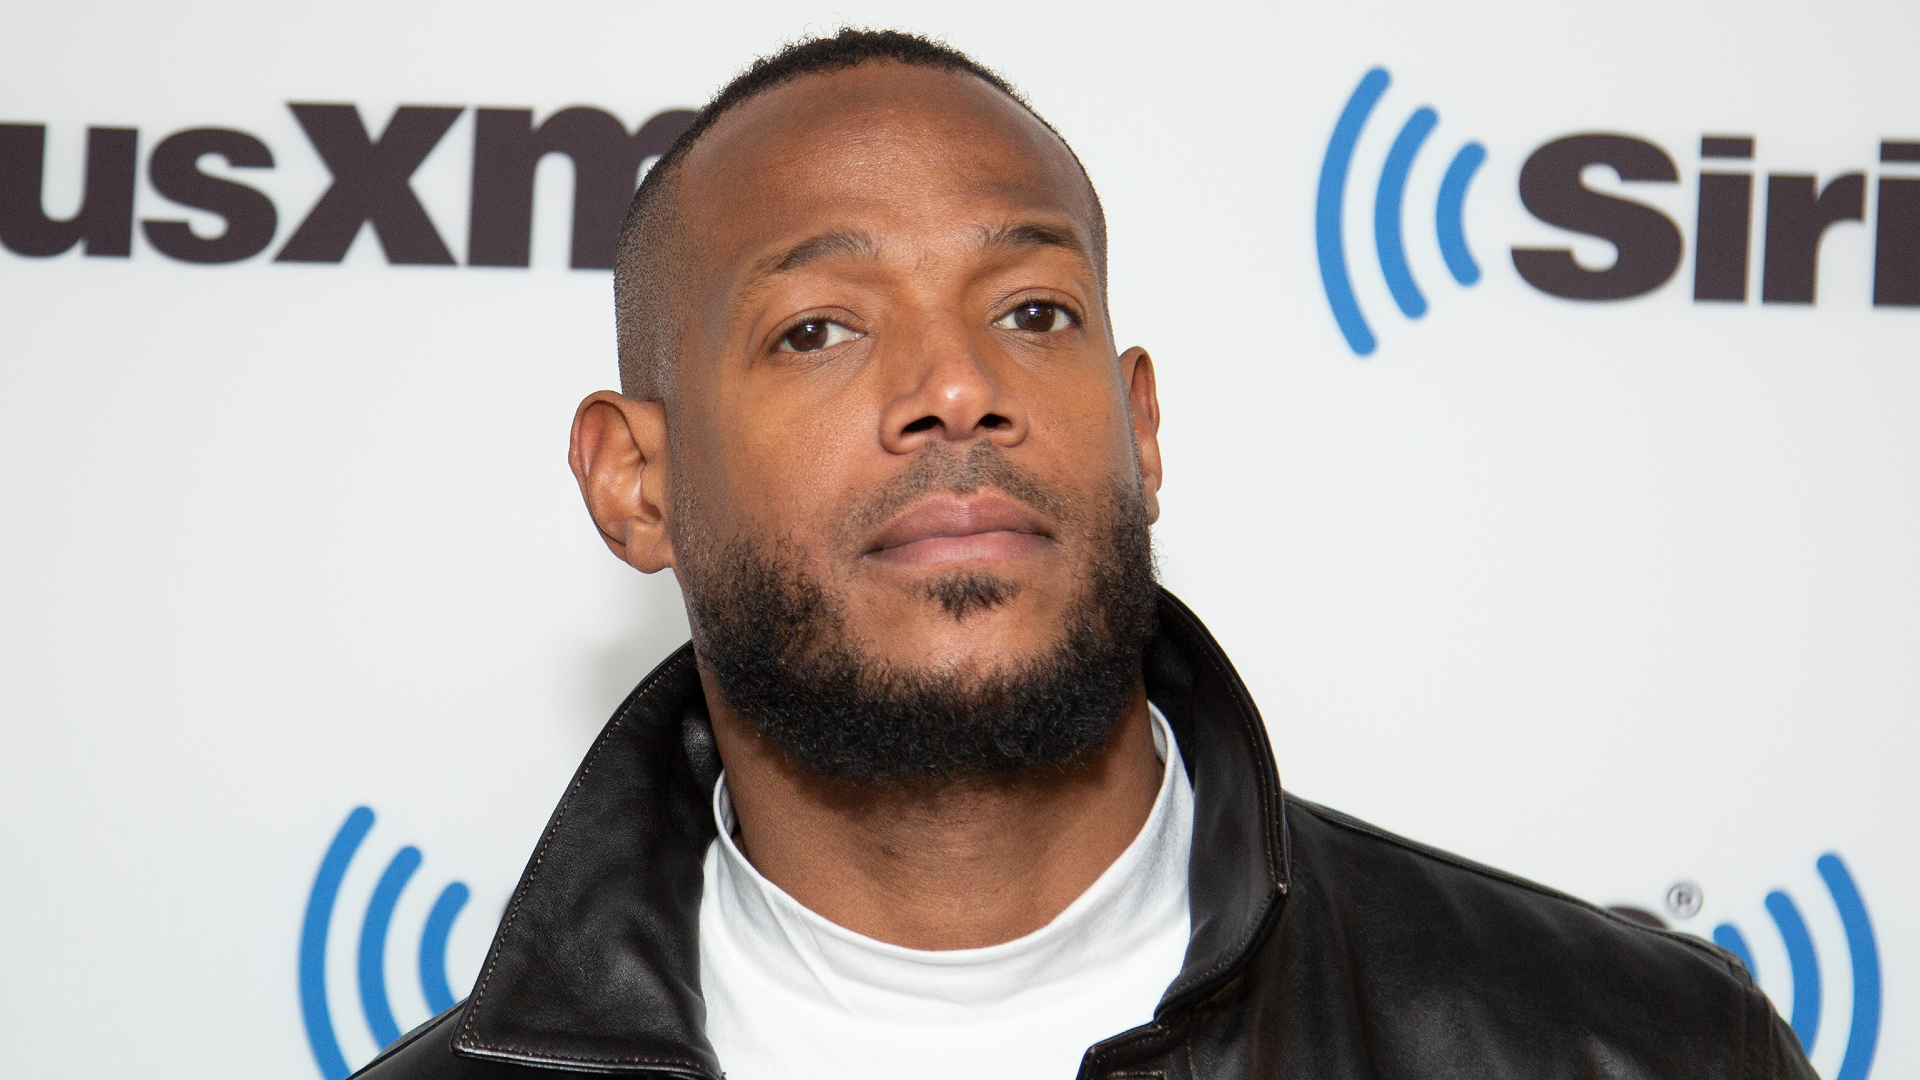 White Chicks 2 Is Necessary For Hollywood Today, Says Marlon Wayans